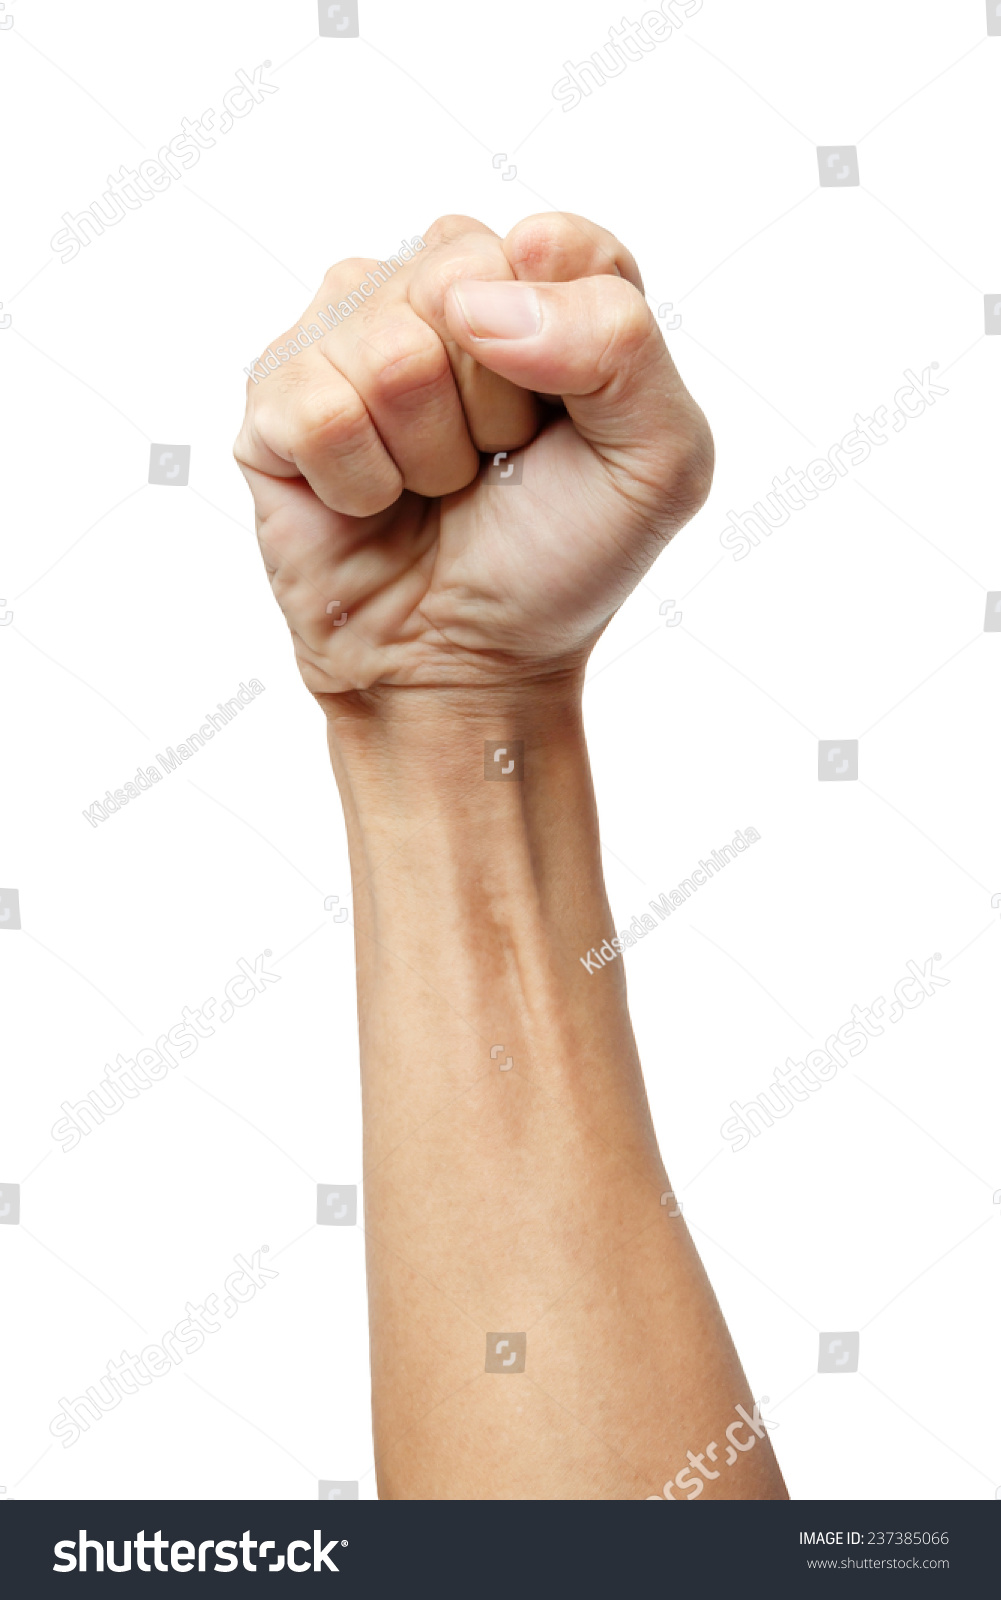 Male clenched fist, isolated on a white background #237385066